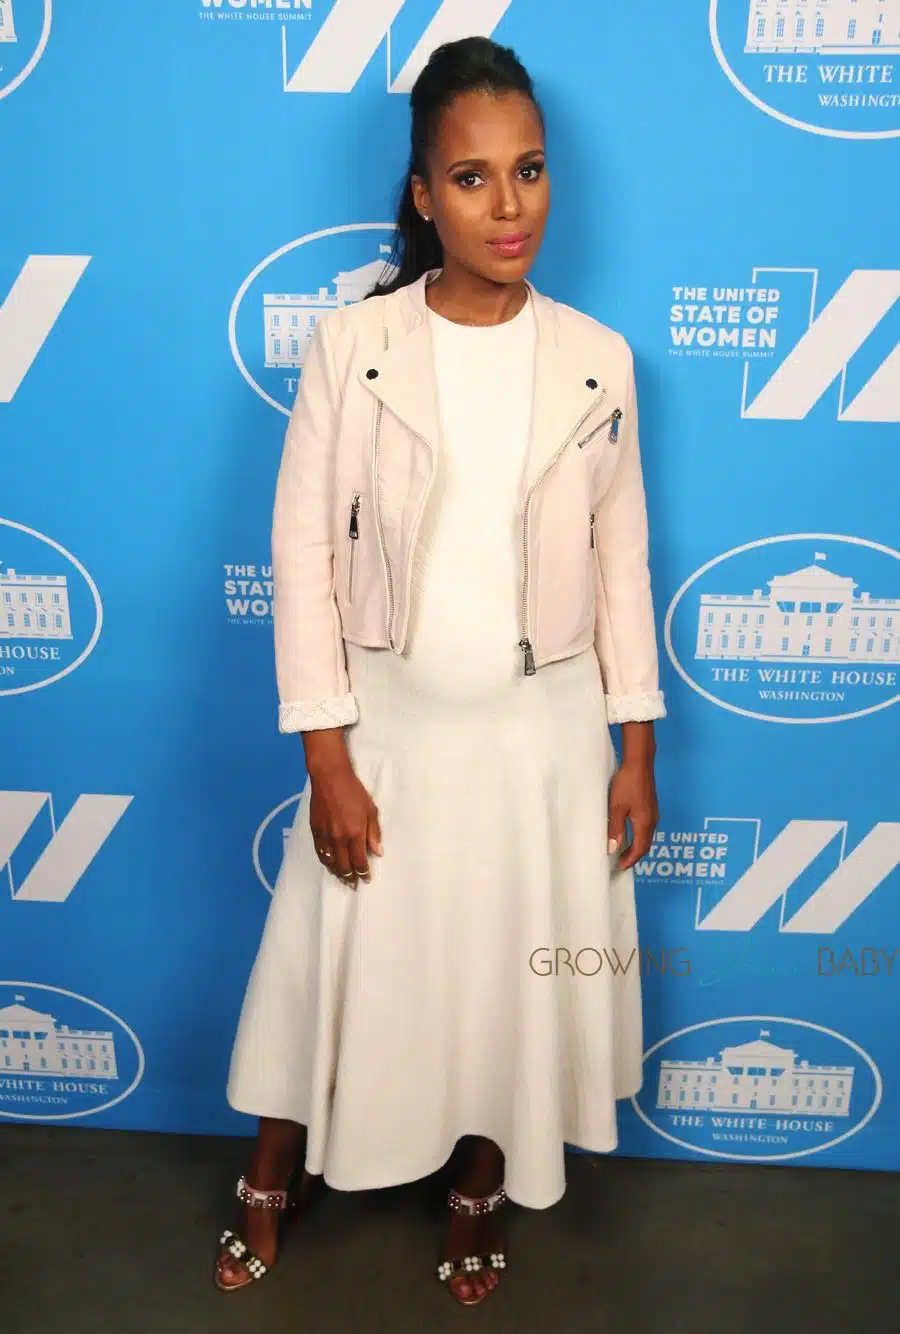 Pregnant Kerry Washington at the White House United State of Women Summit